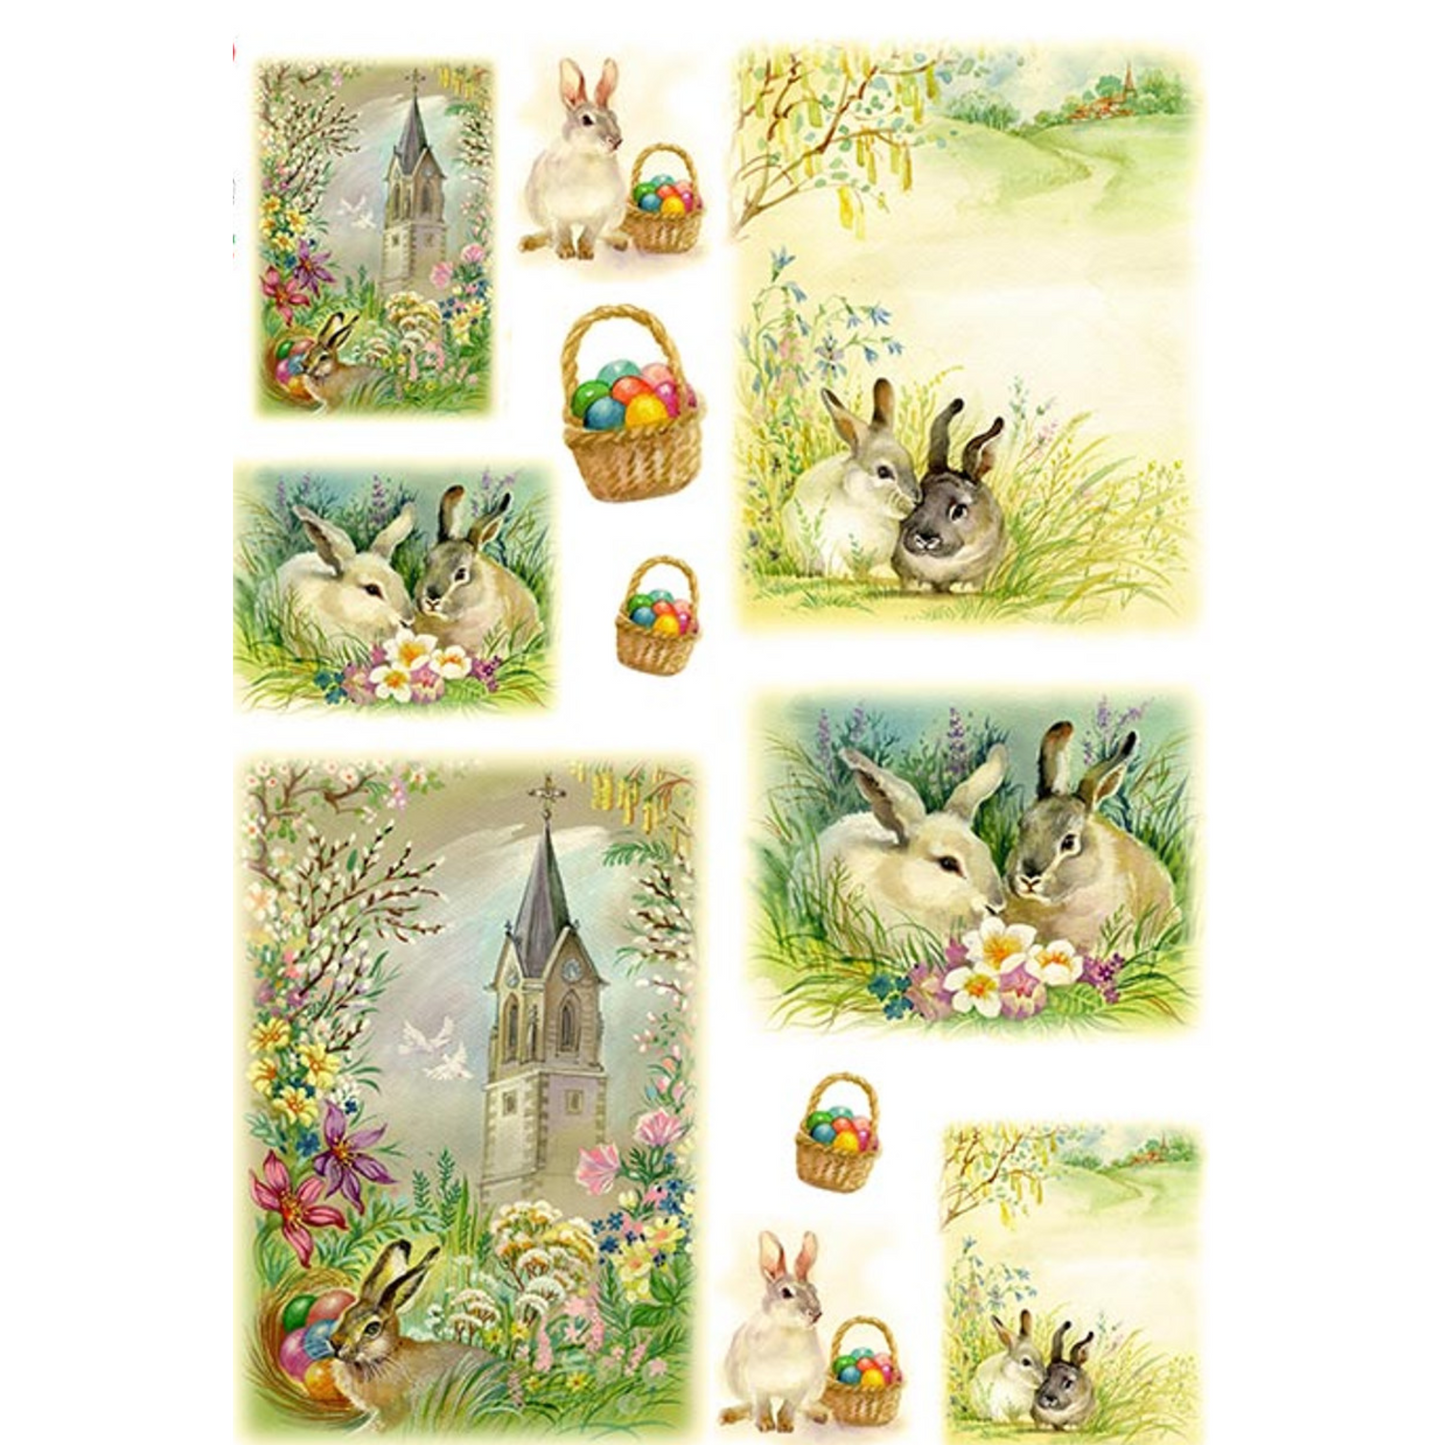 "Easter Scenes" Holiday 0036-decoupage rice paper by Paper Designs. Size A4 available at Milton's Daughter.